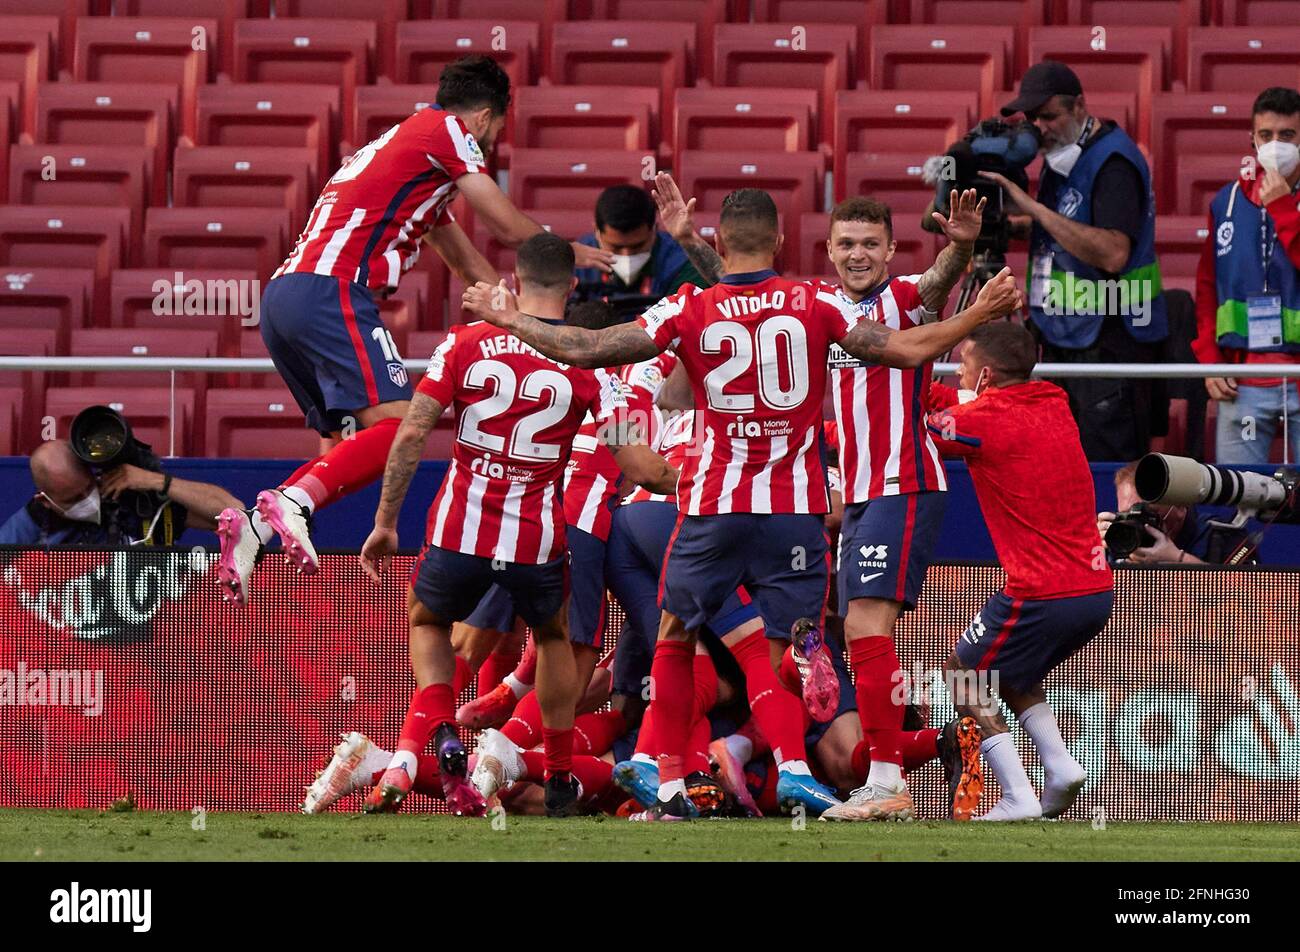 Madrid, Spain. 16th May, 2021. Players of Atletico de Madrid celebrate  after scoring a goal during the La Liga match round 36 between Atletico  Madrid and CA Osasuna at Wanda Metropolitano Stadium.Sporting